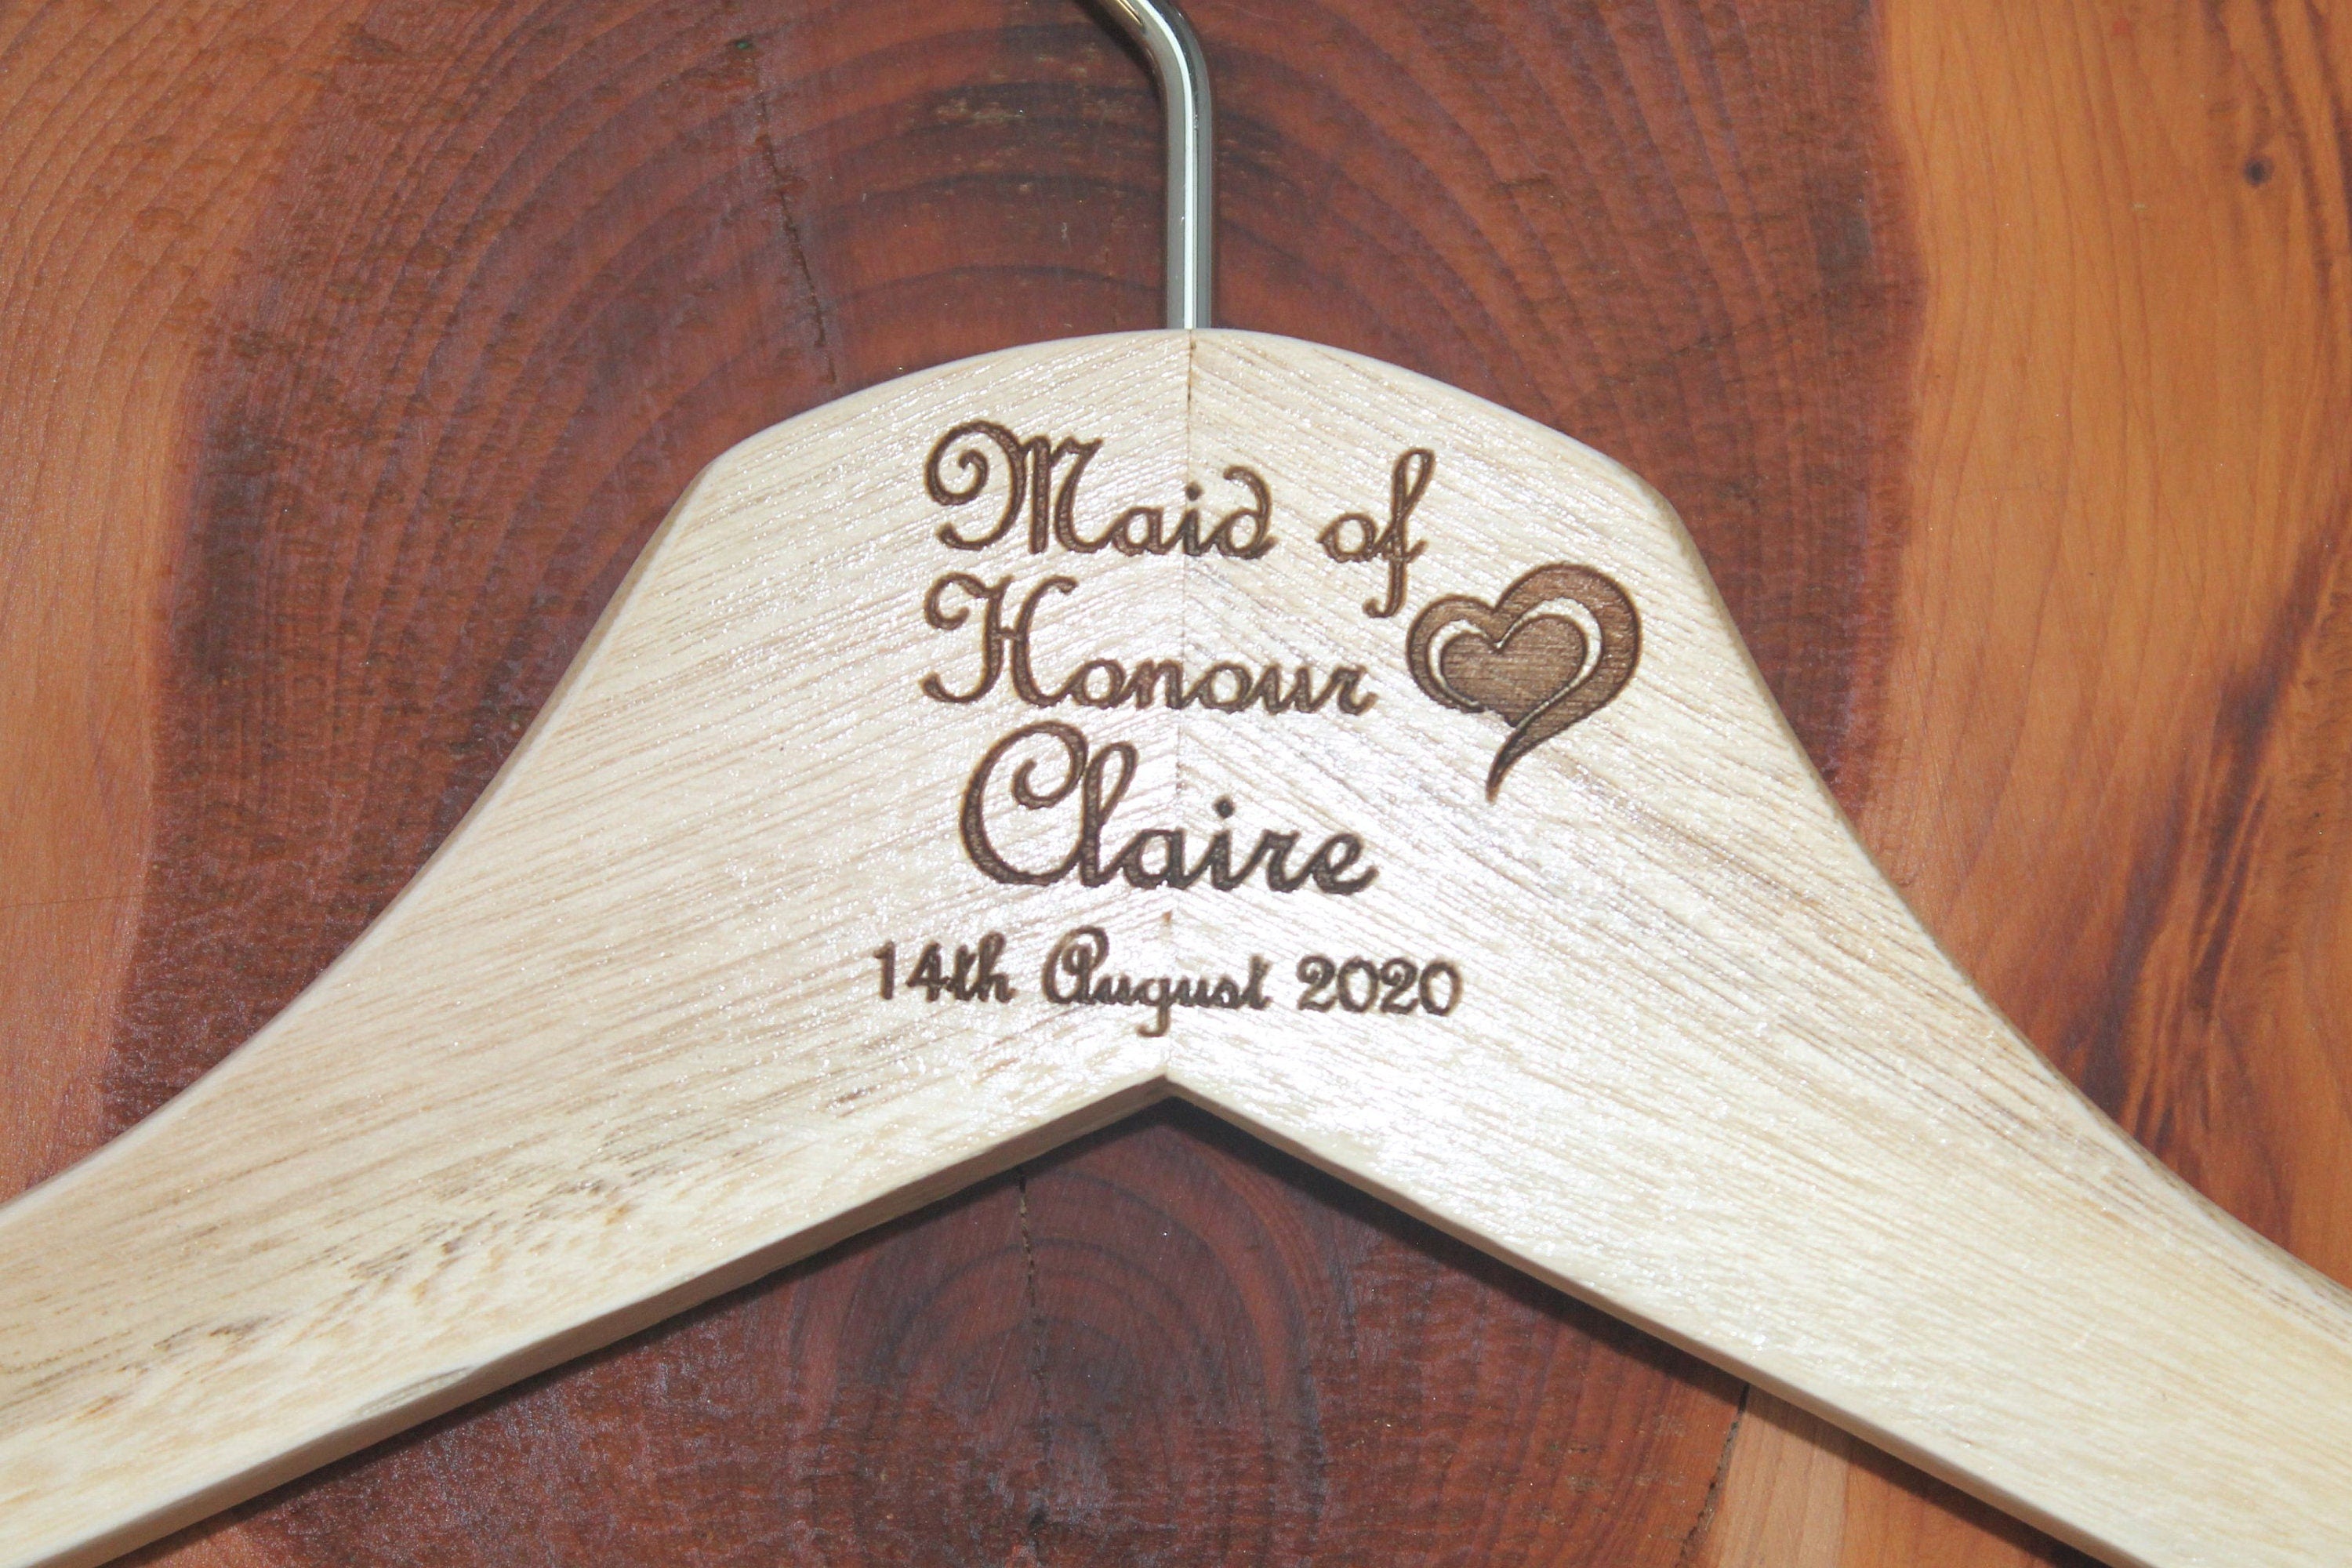 Personalised Bridal Wedding Hanger in Wood or White - Hanger Engraved Wedding Gift Bride, Bridesmaids and more - Deco Heart